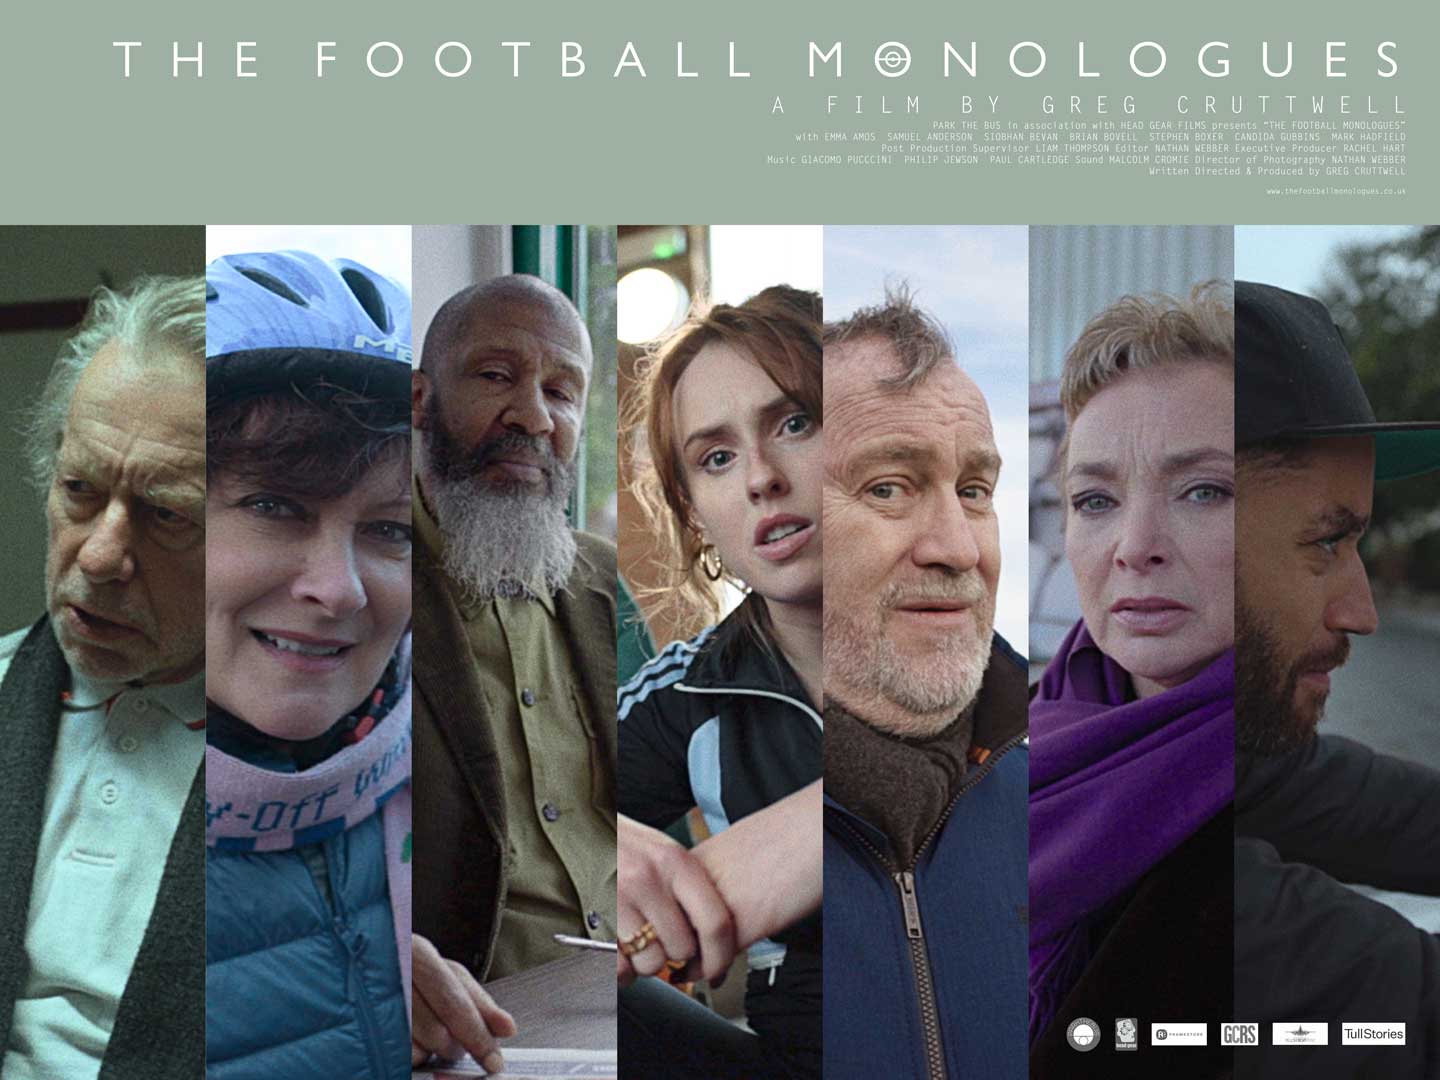 The Football Monologues quad poster